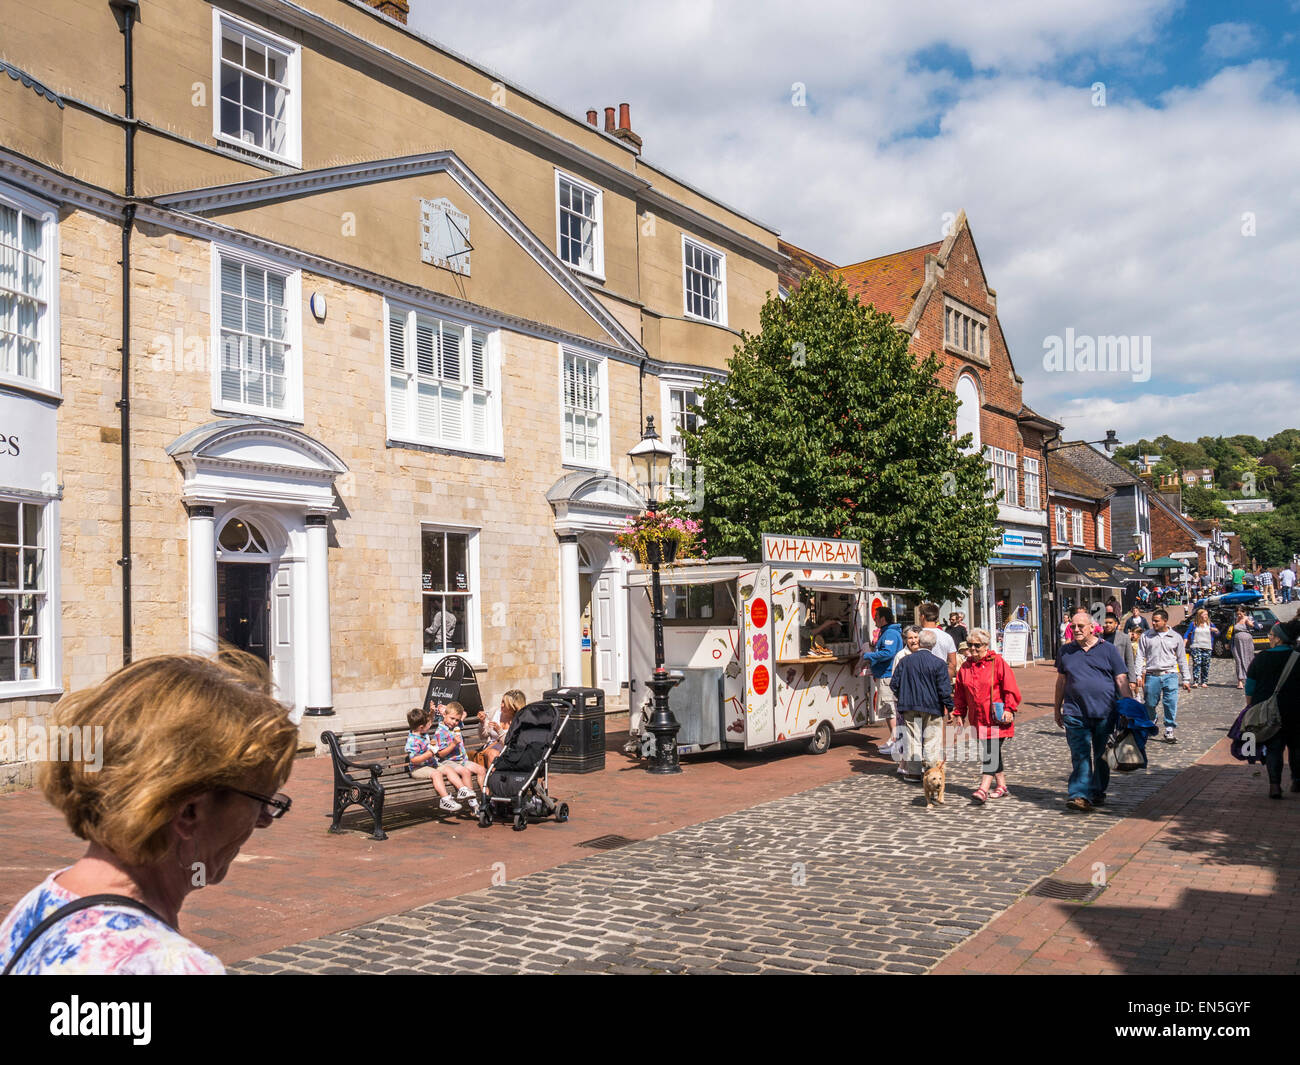 Part of the main High Street in Lewes leading towards the River Ouse & Cliffe High Street, Lewes, East Sussex. Stock Photo